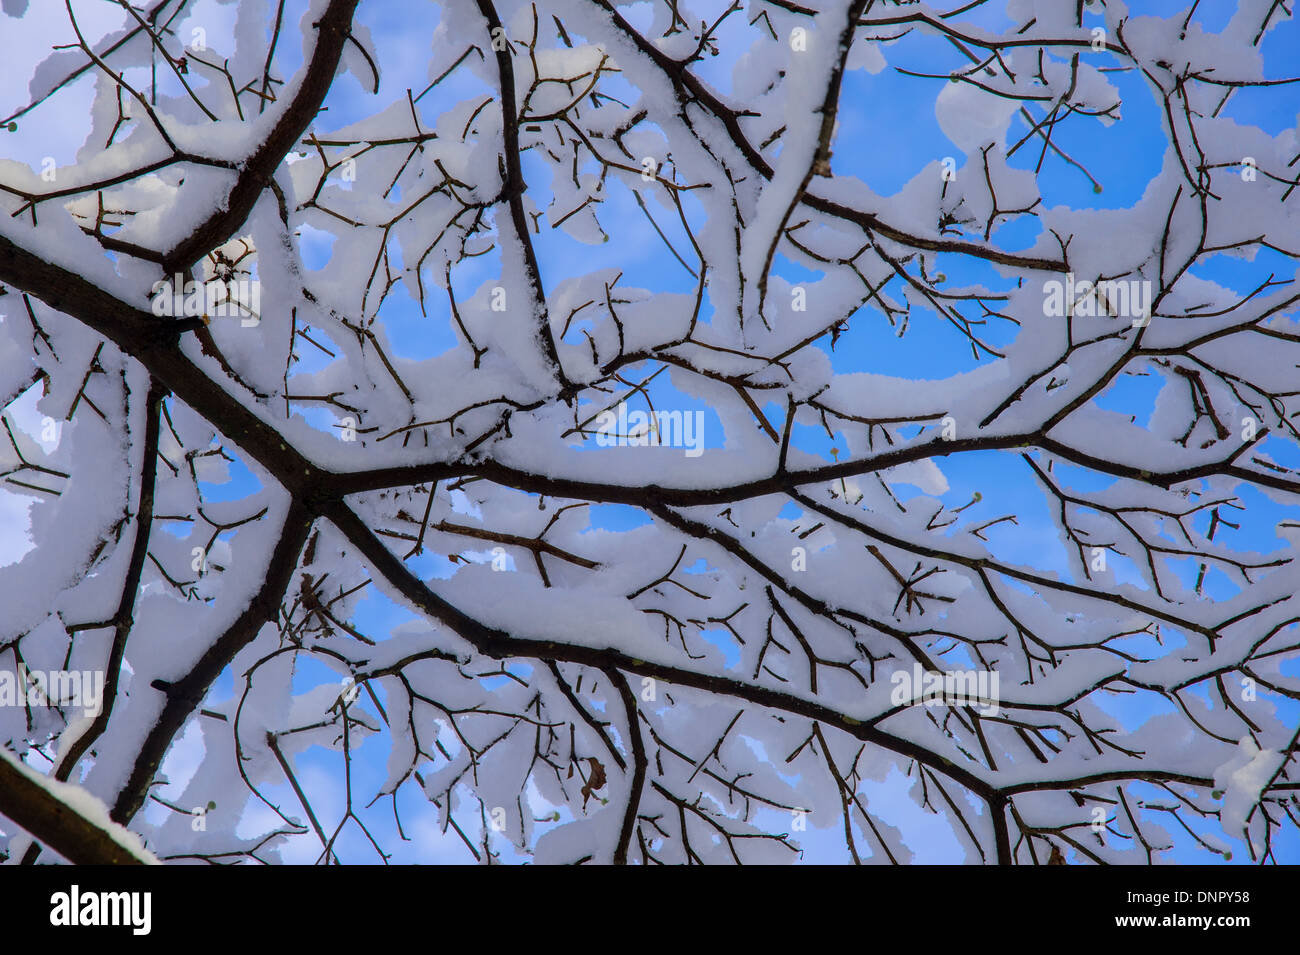 Winter Scene Snow On Tree Branch Detail With Blue Sky Stock Photo